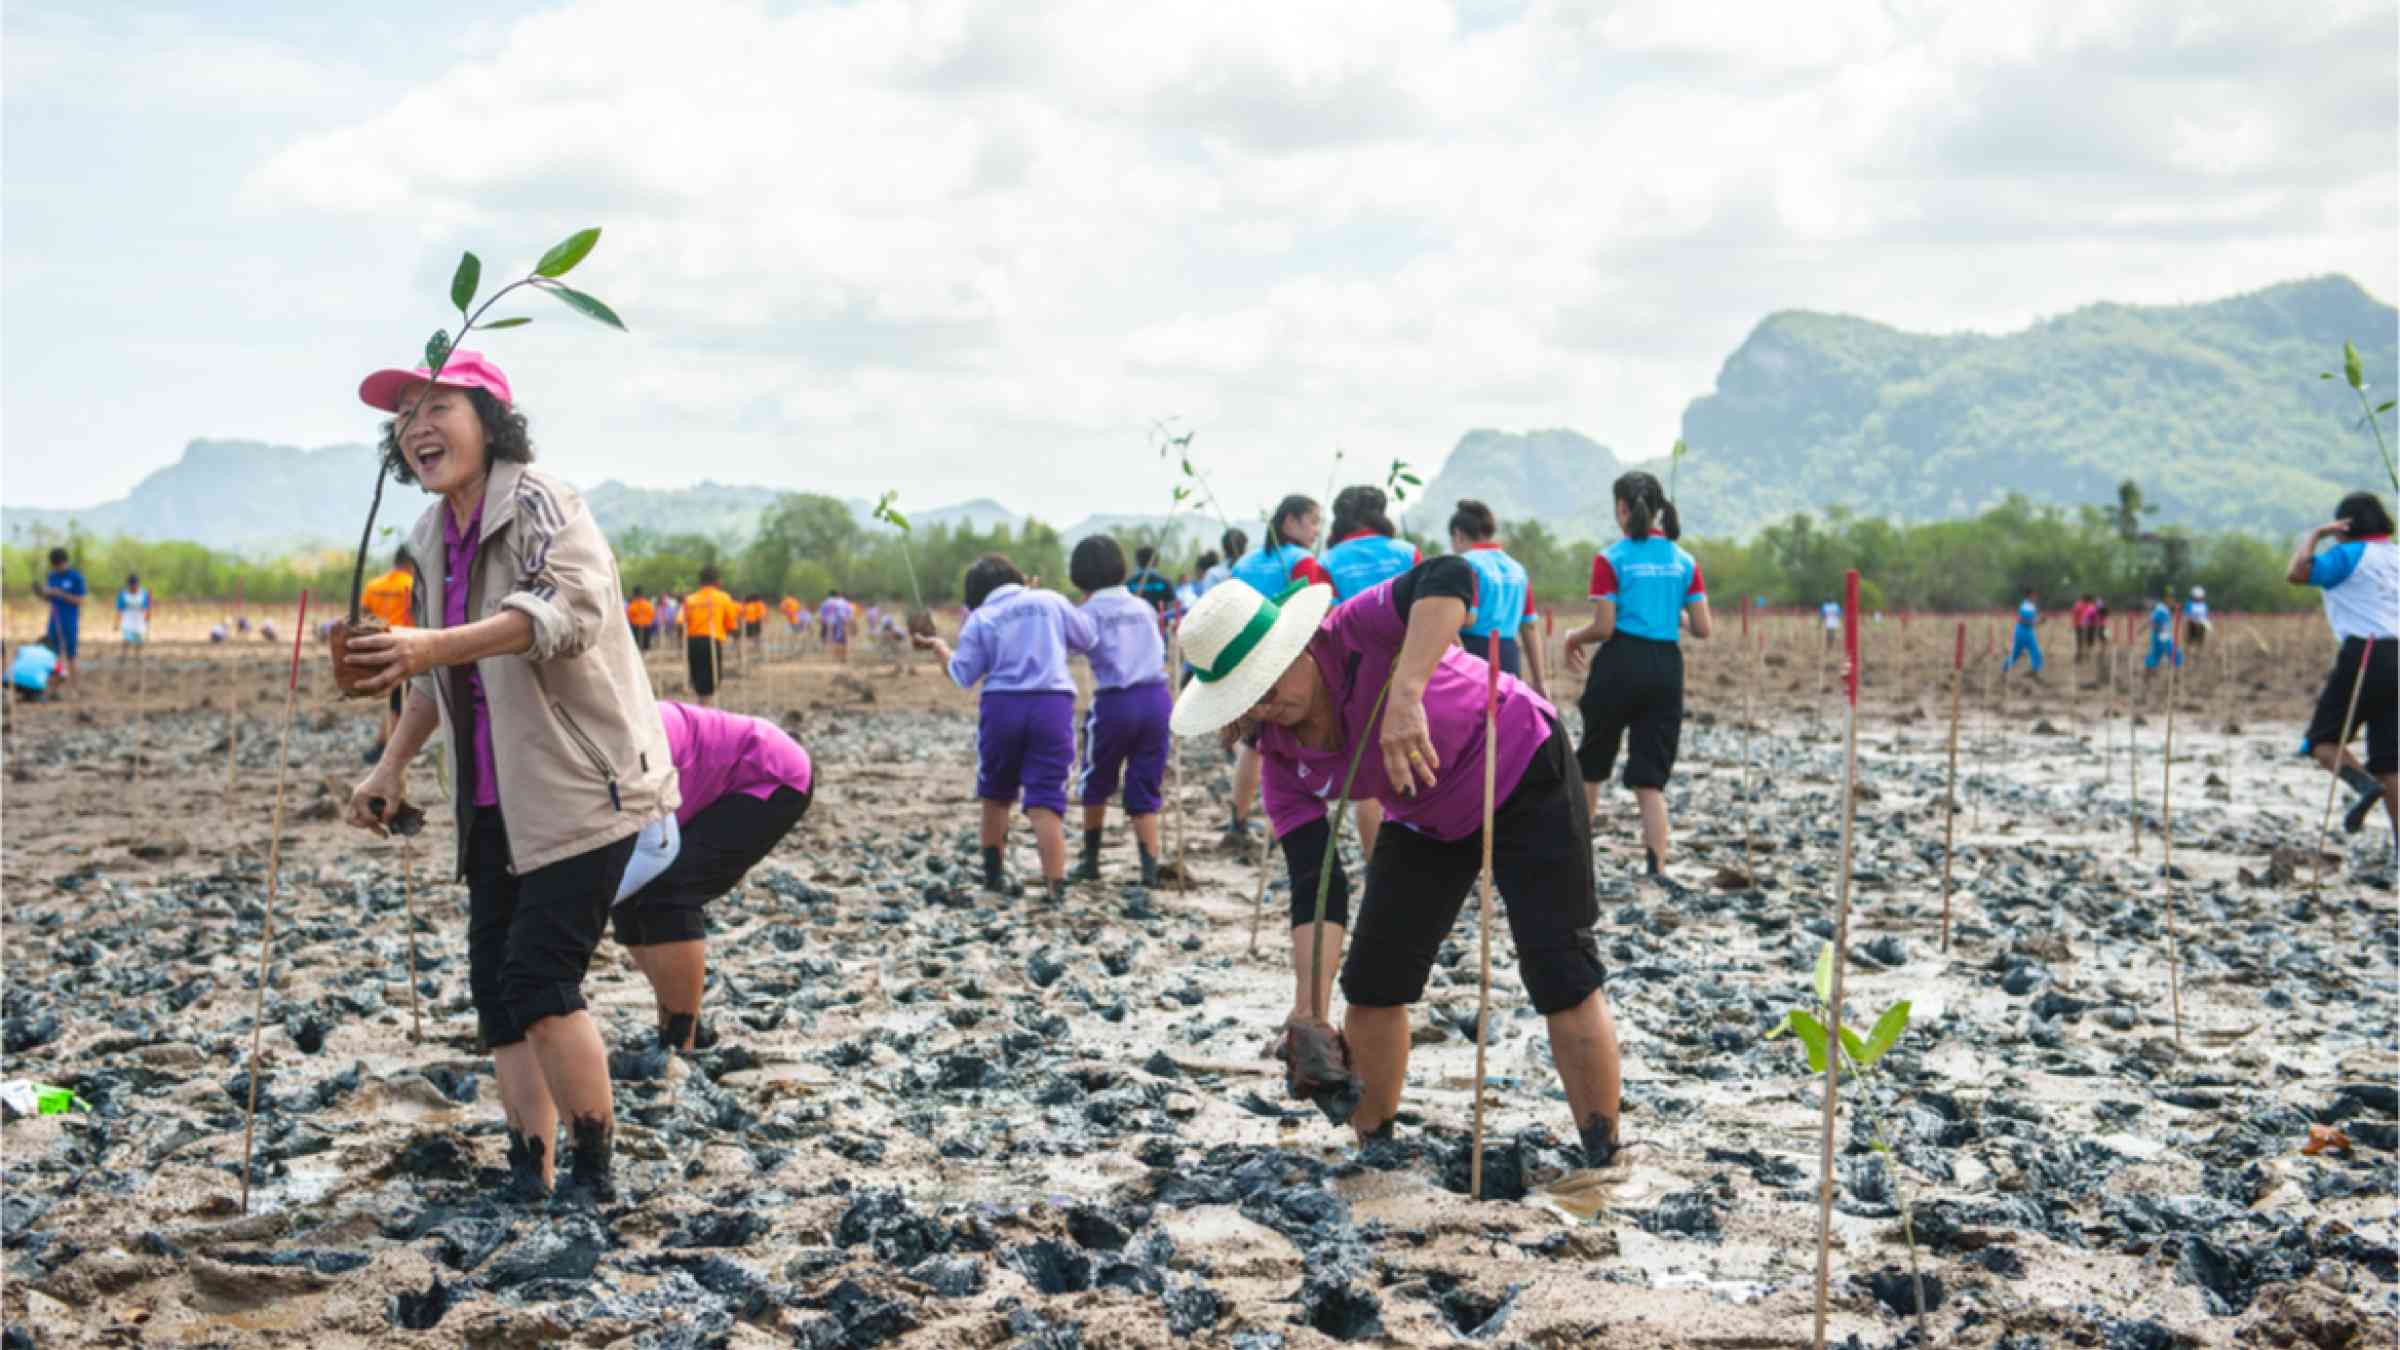 People Confederate Campaigners planted mangroves to protect the environment back to nature in Thailand.